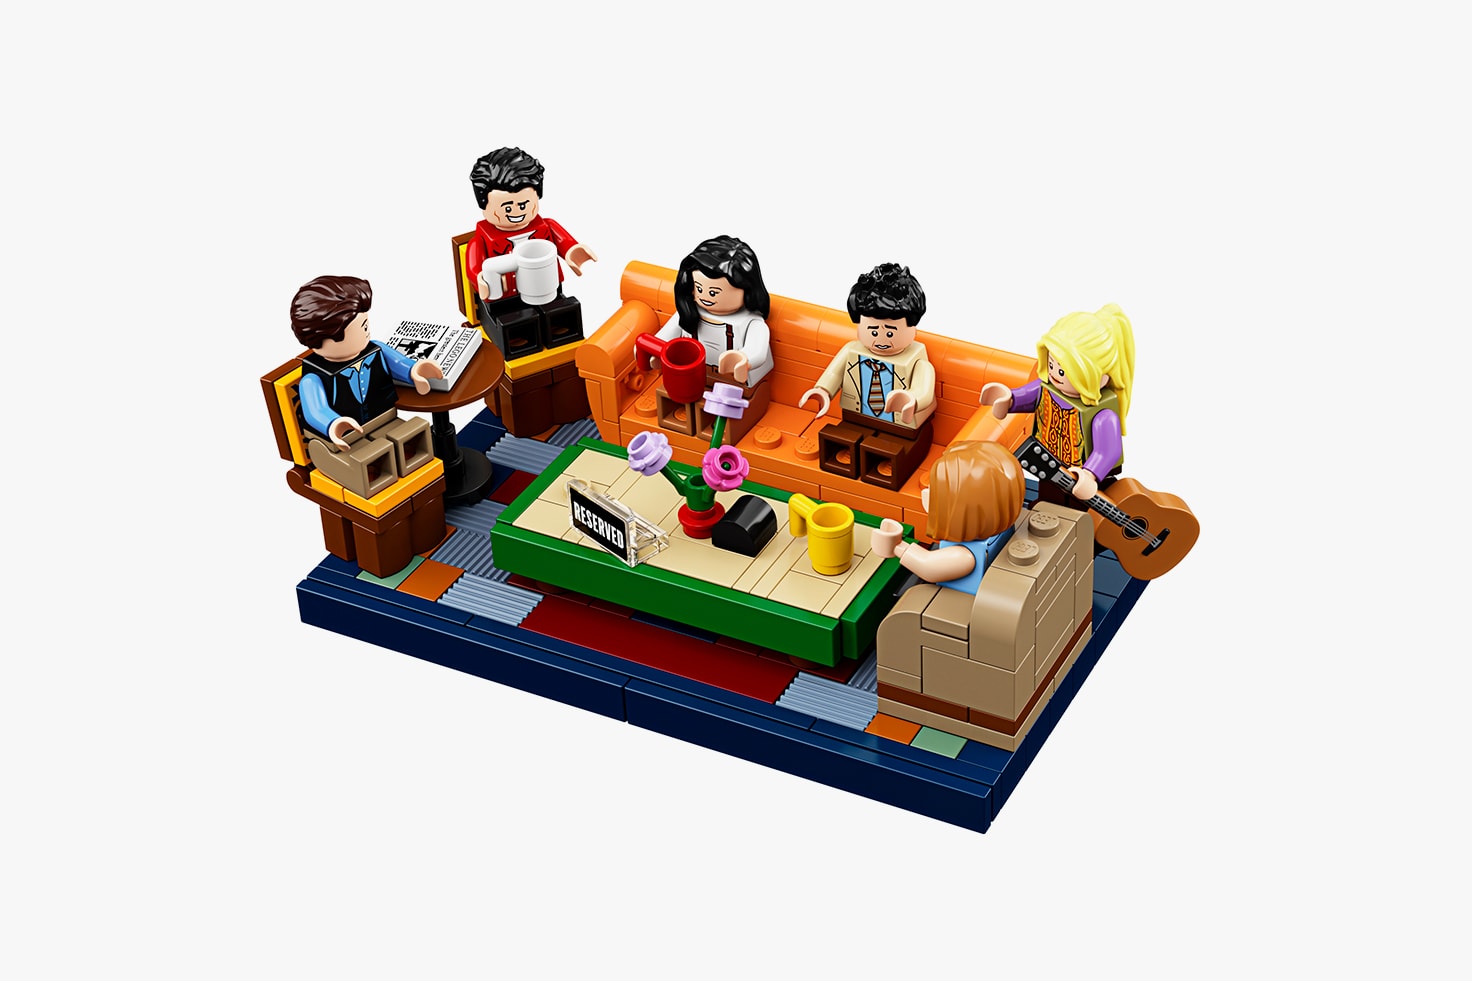 LEGO Friends TV Series Set Will Be There for You in September 2019